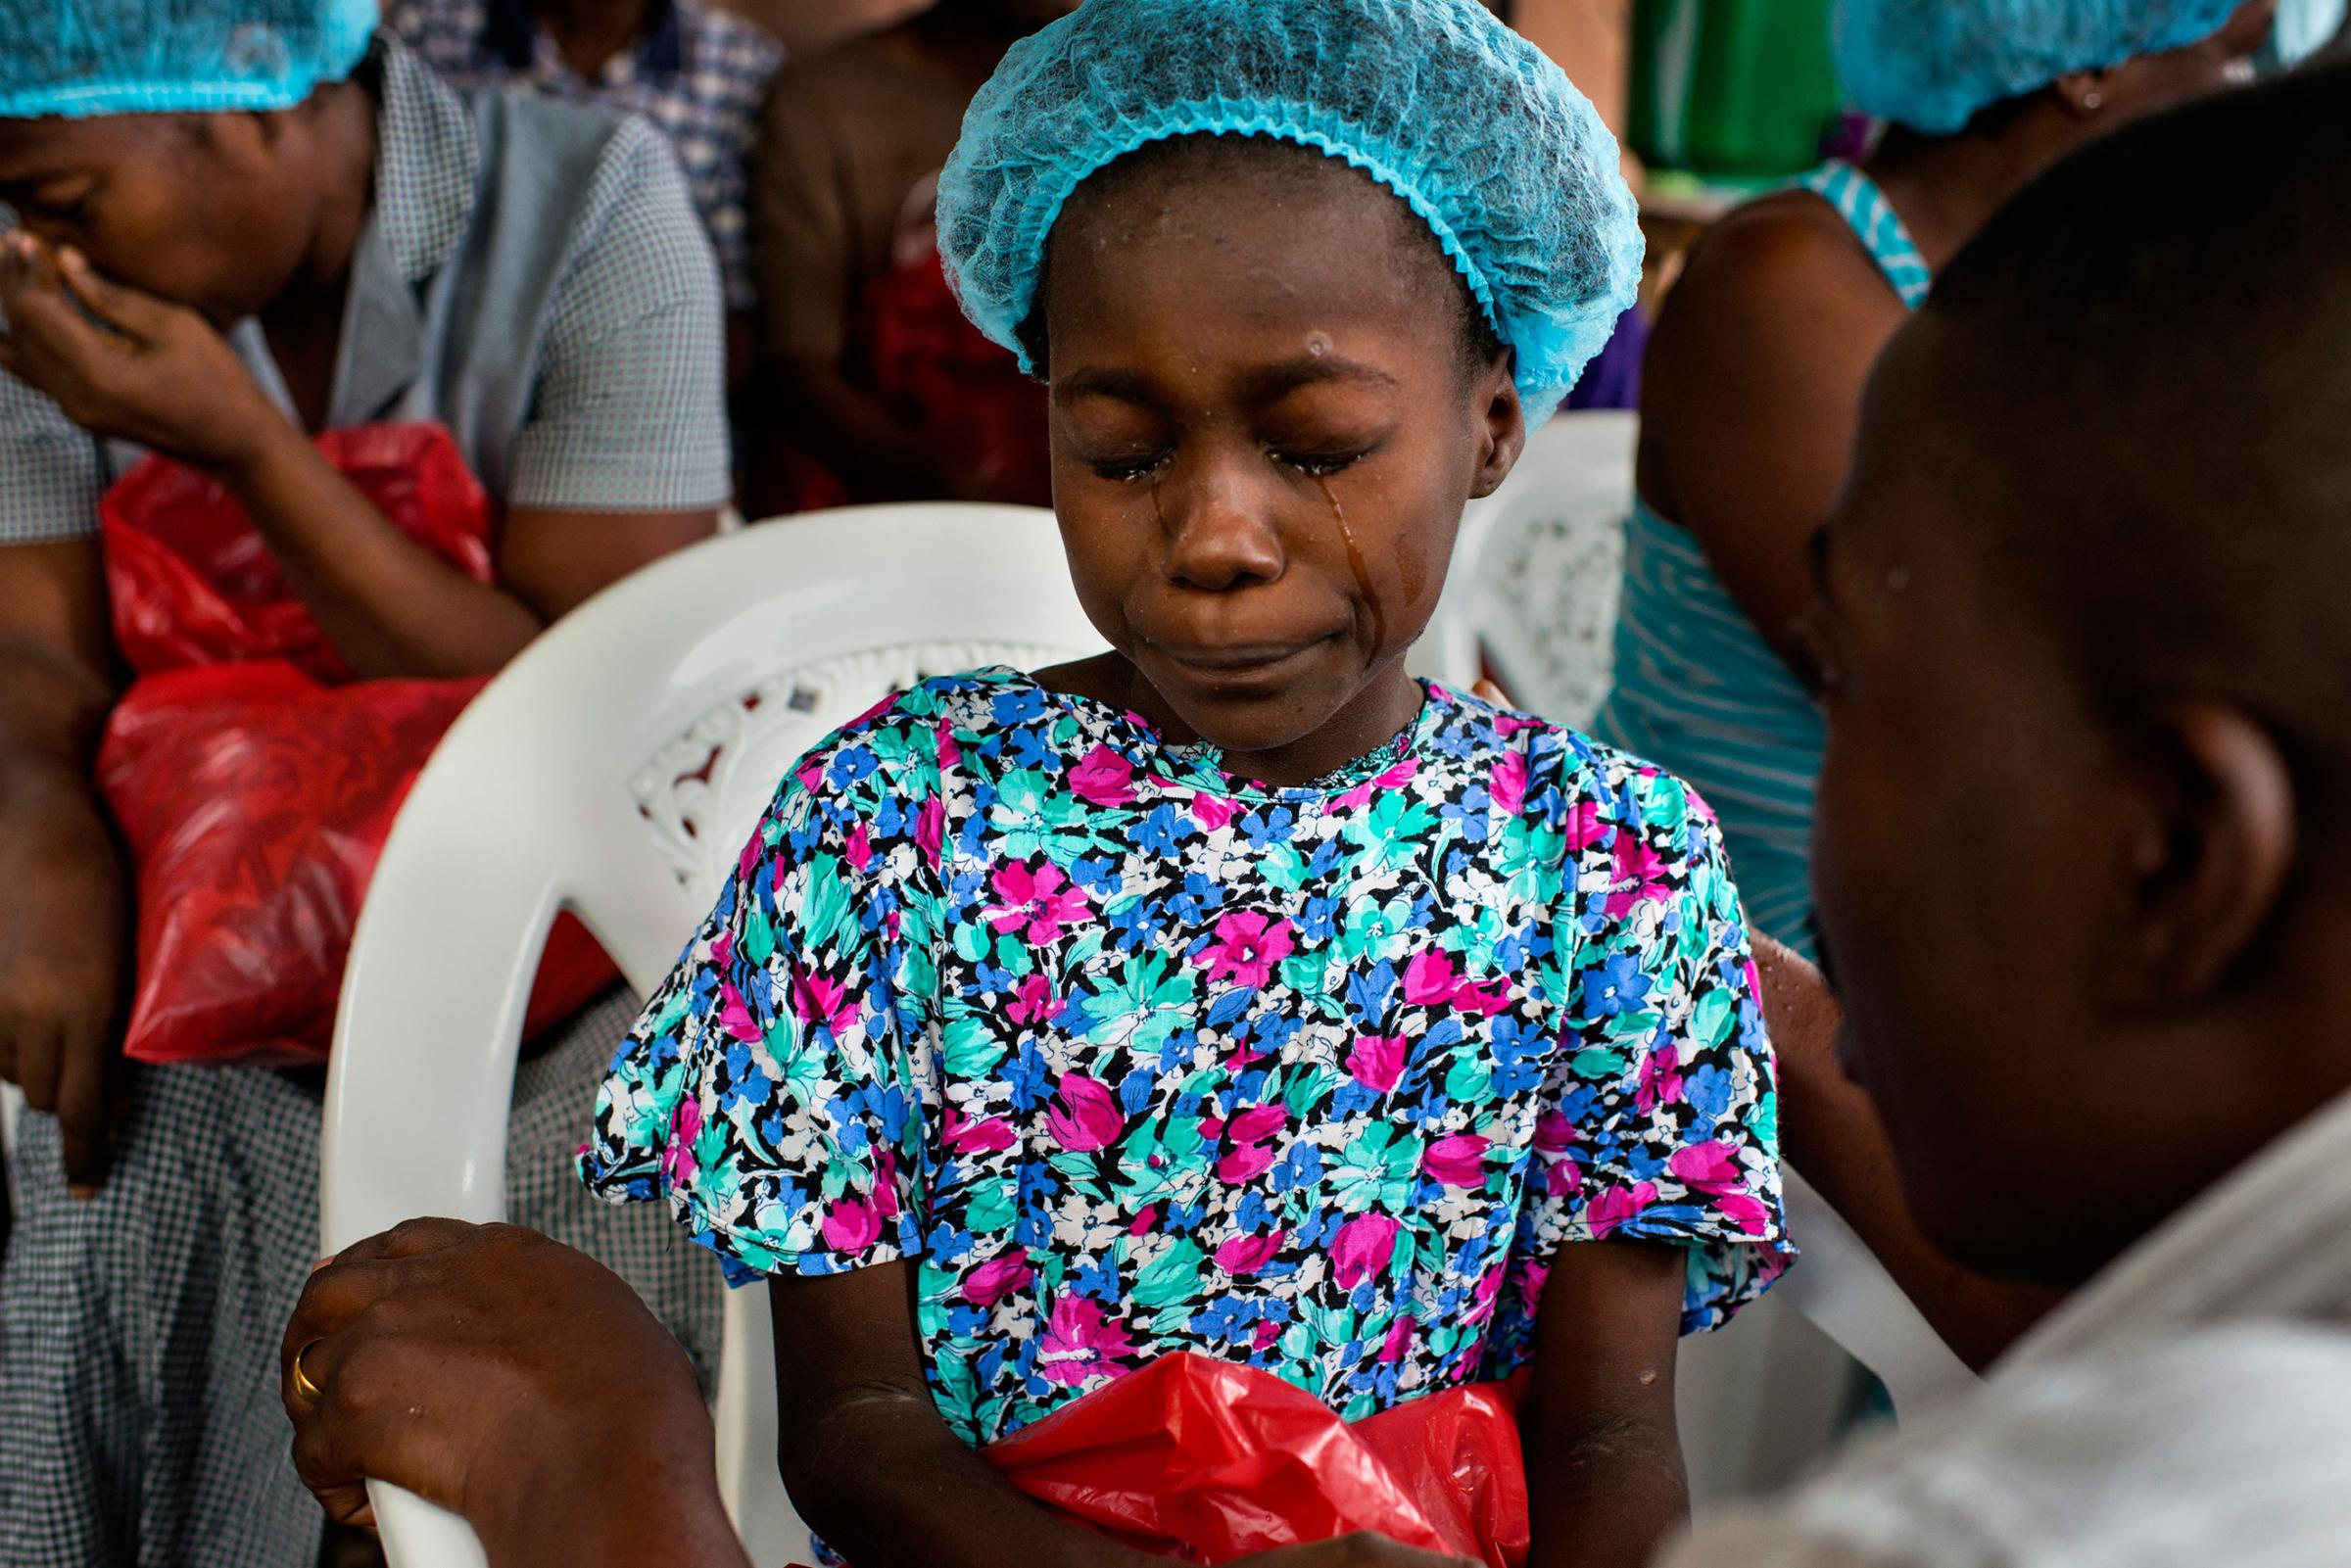 Esther Tokpah, 11 an orphan, weeps as Dr. Jerry Brown tries to console her before she was released from care on Sept. 24, 2014 in Monrovia, Liberia.